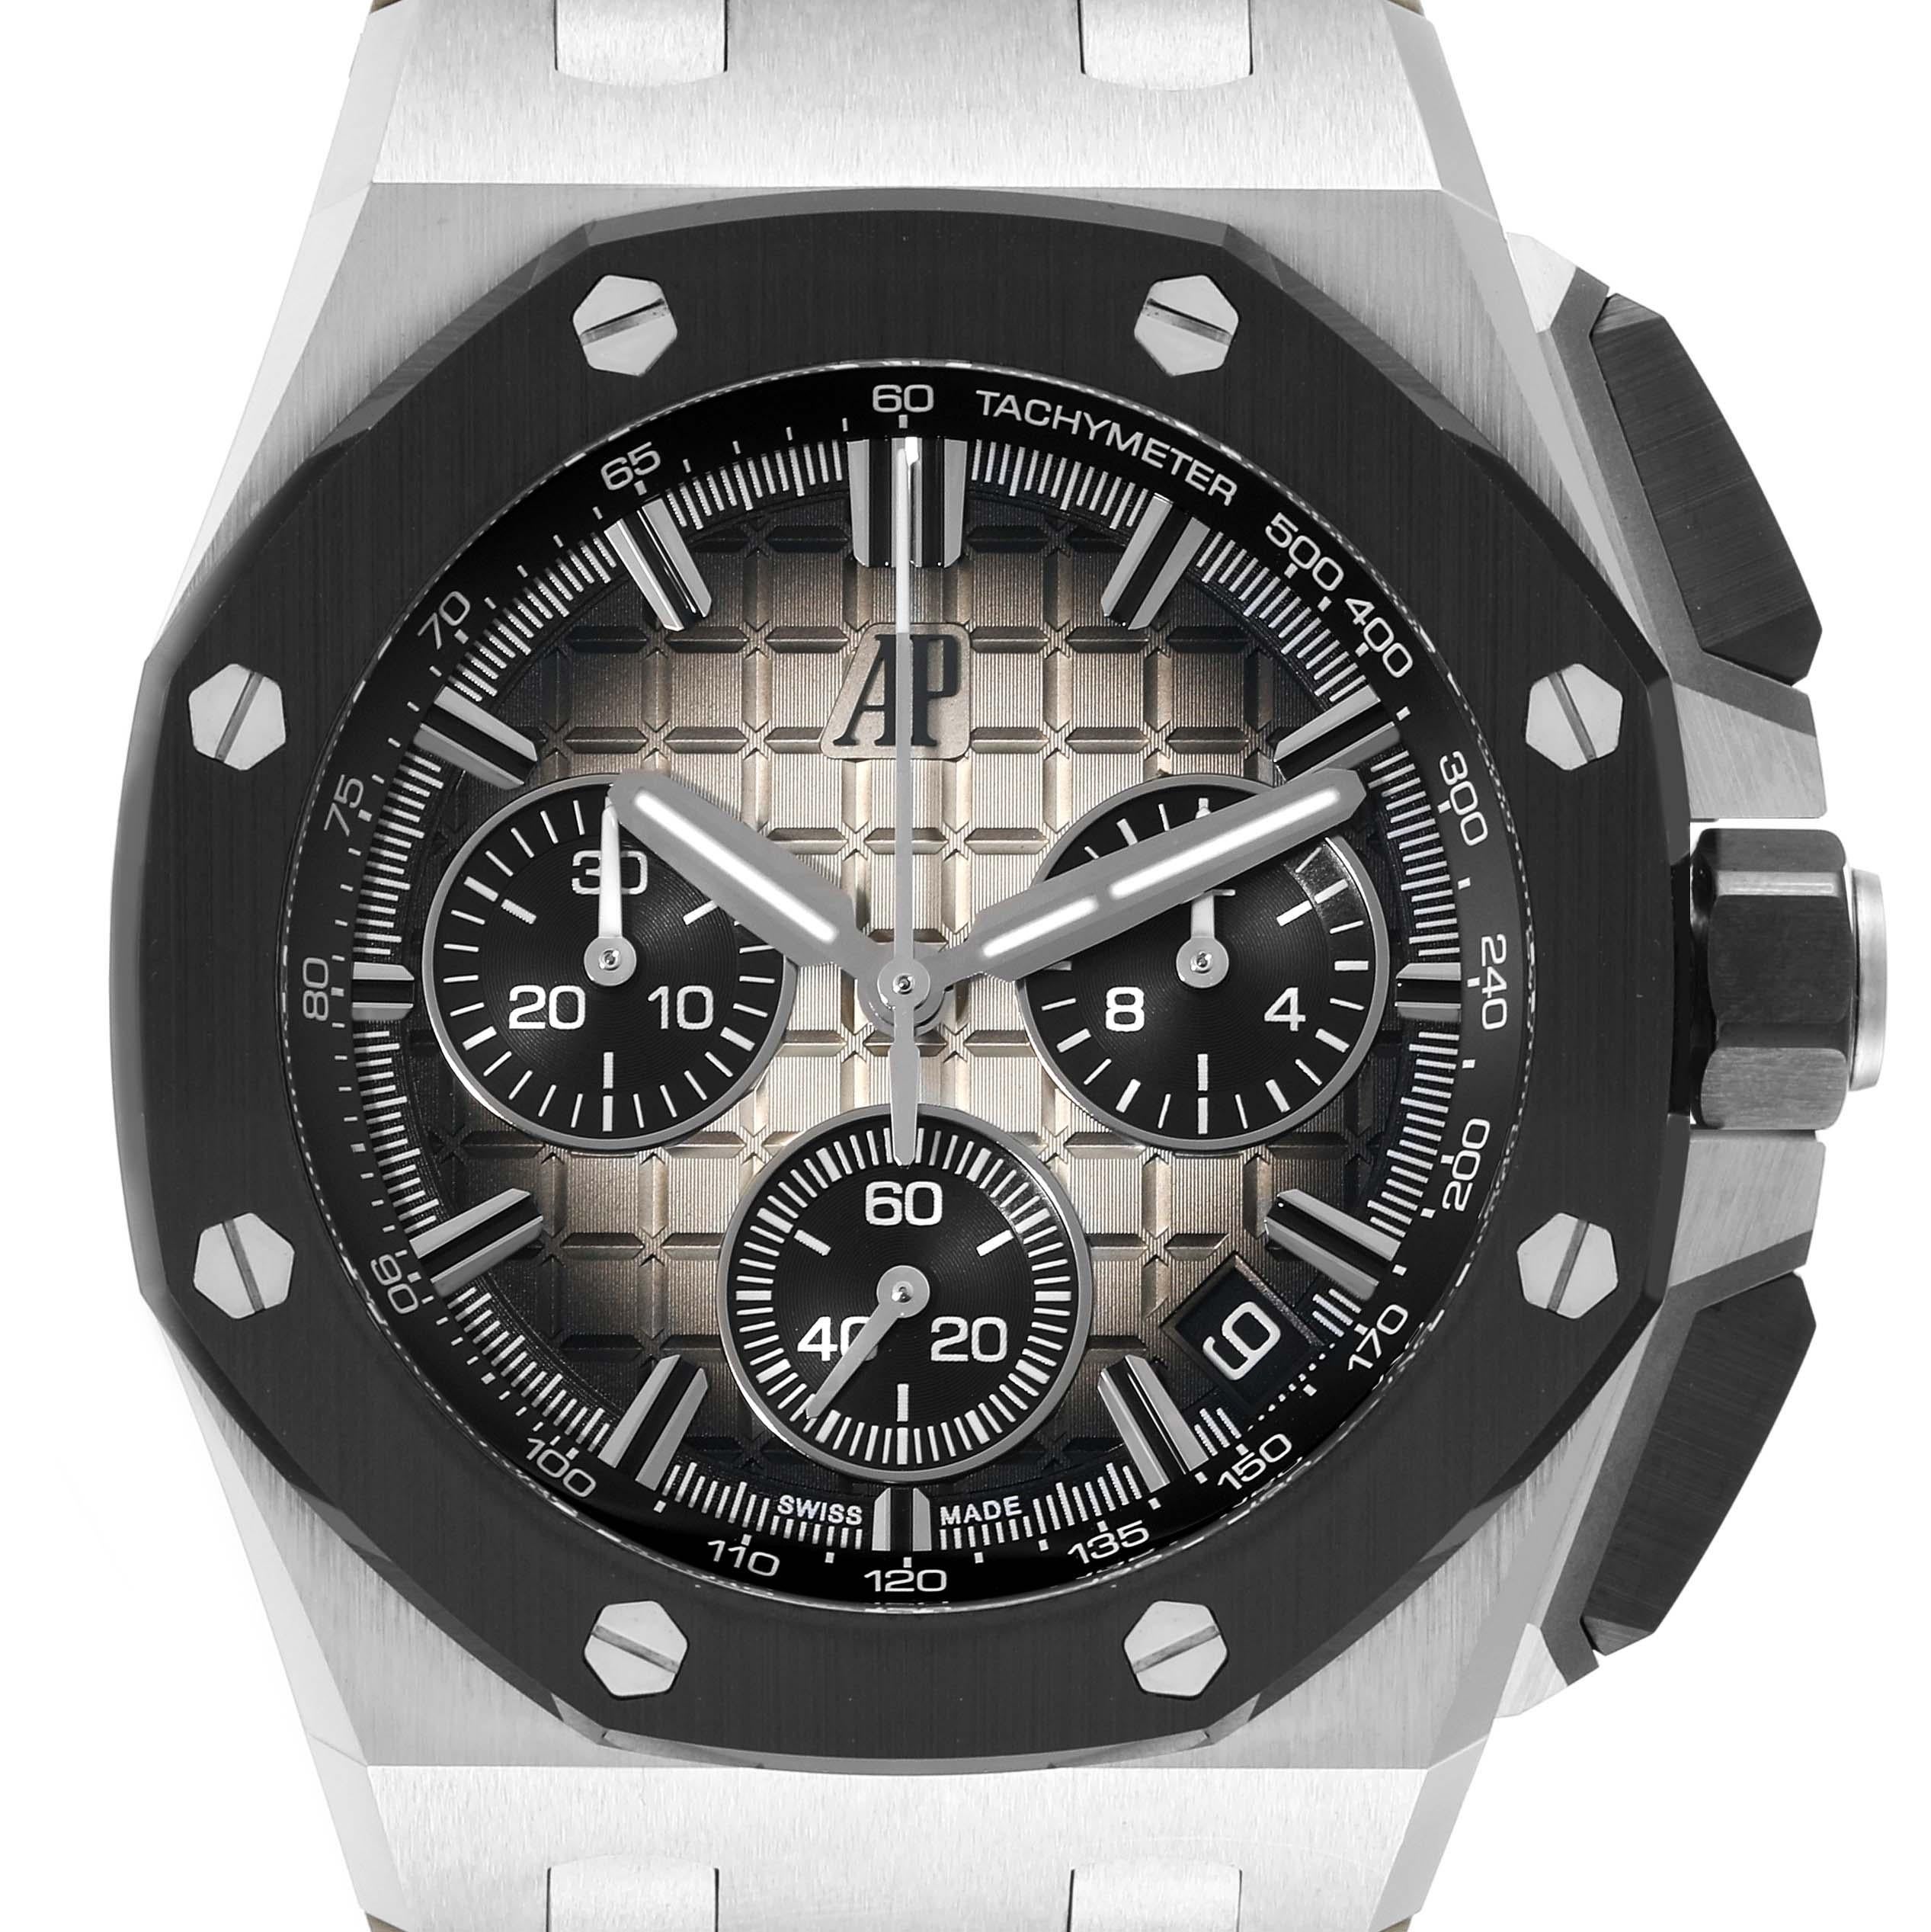 Audemars Piguet Royal Oak Offshore Chronograph Steel Mens Watch 26420SO Box Card. Automatic self-winding chronograph movement with flyback function. Stainless steel octagonal case 43 mm in diameter. Case thickness: 14.4 mm. Exhibition transparent